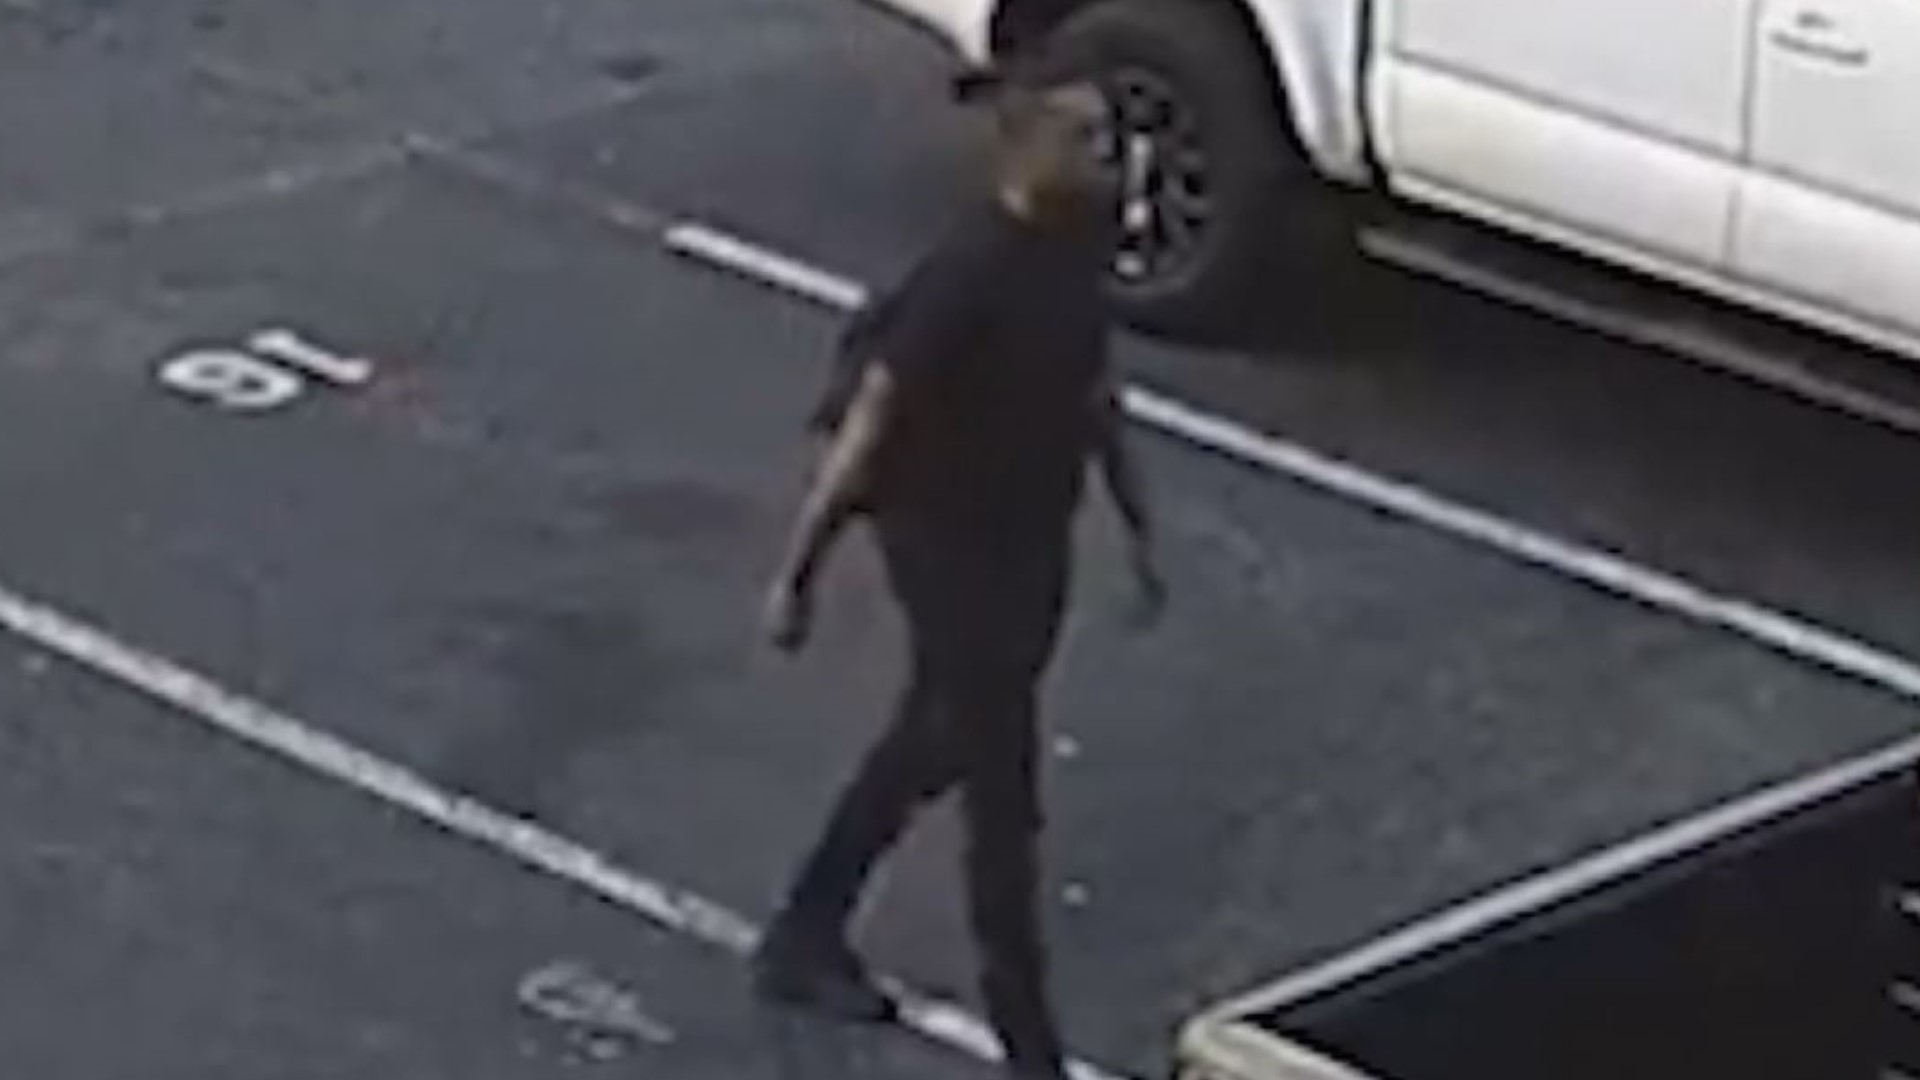 Video shows him leaving a black pick-up truck and walking across the parking lot across to a black SUV.